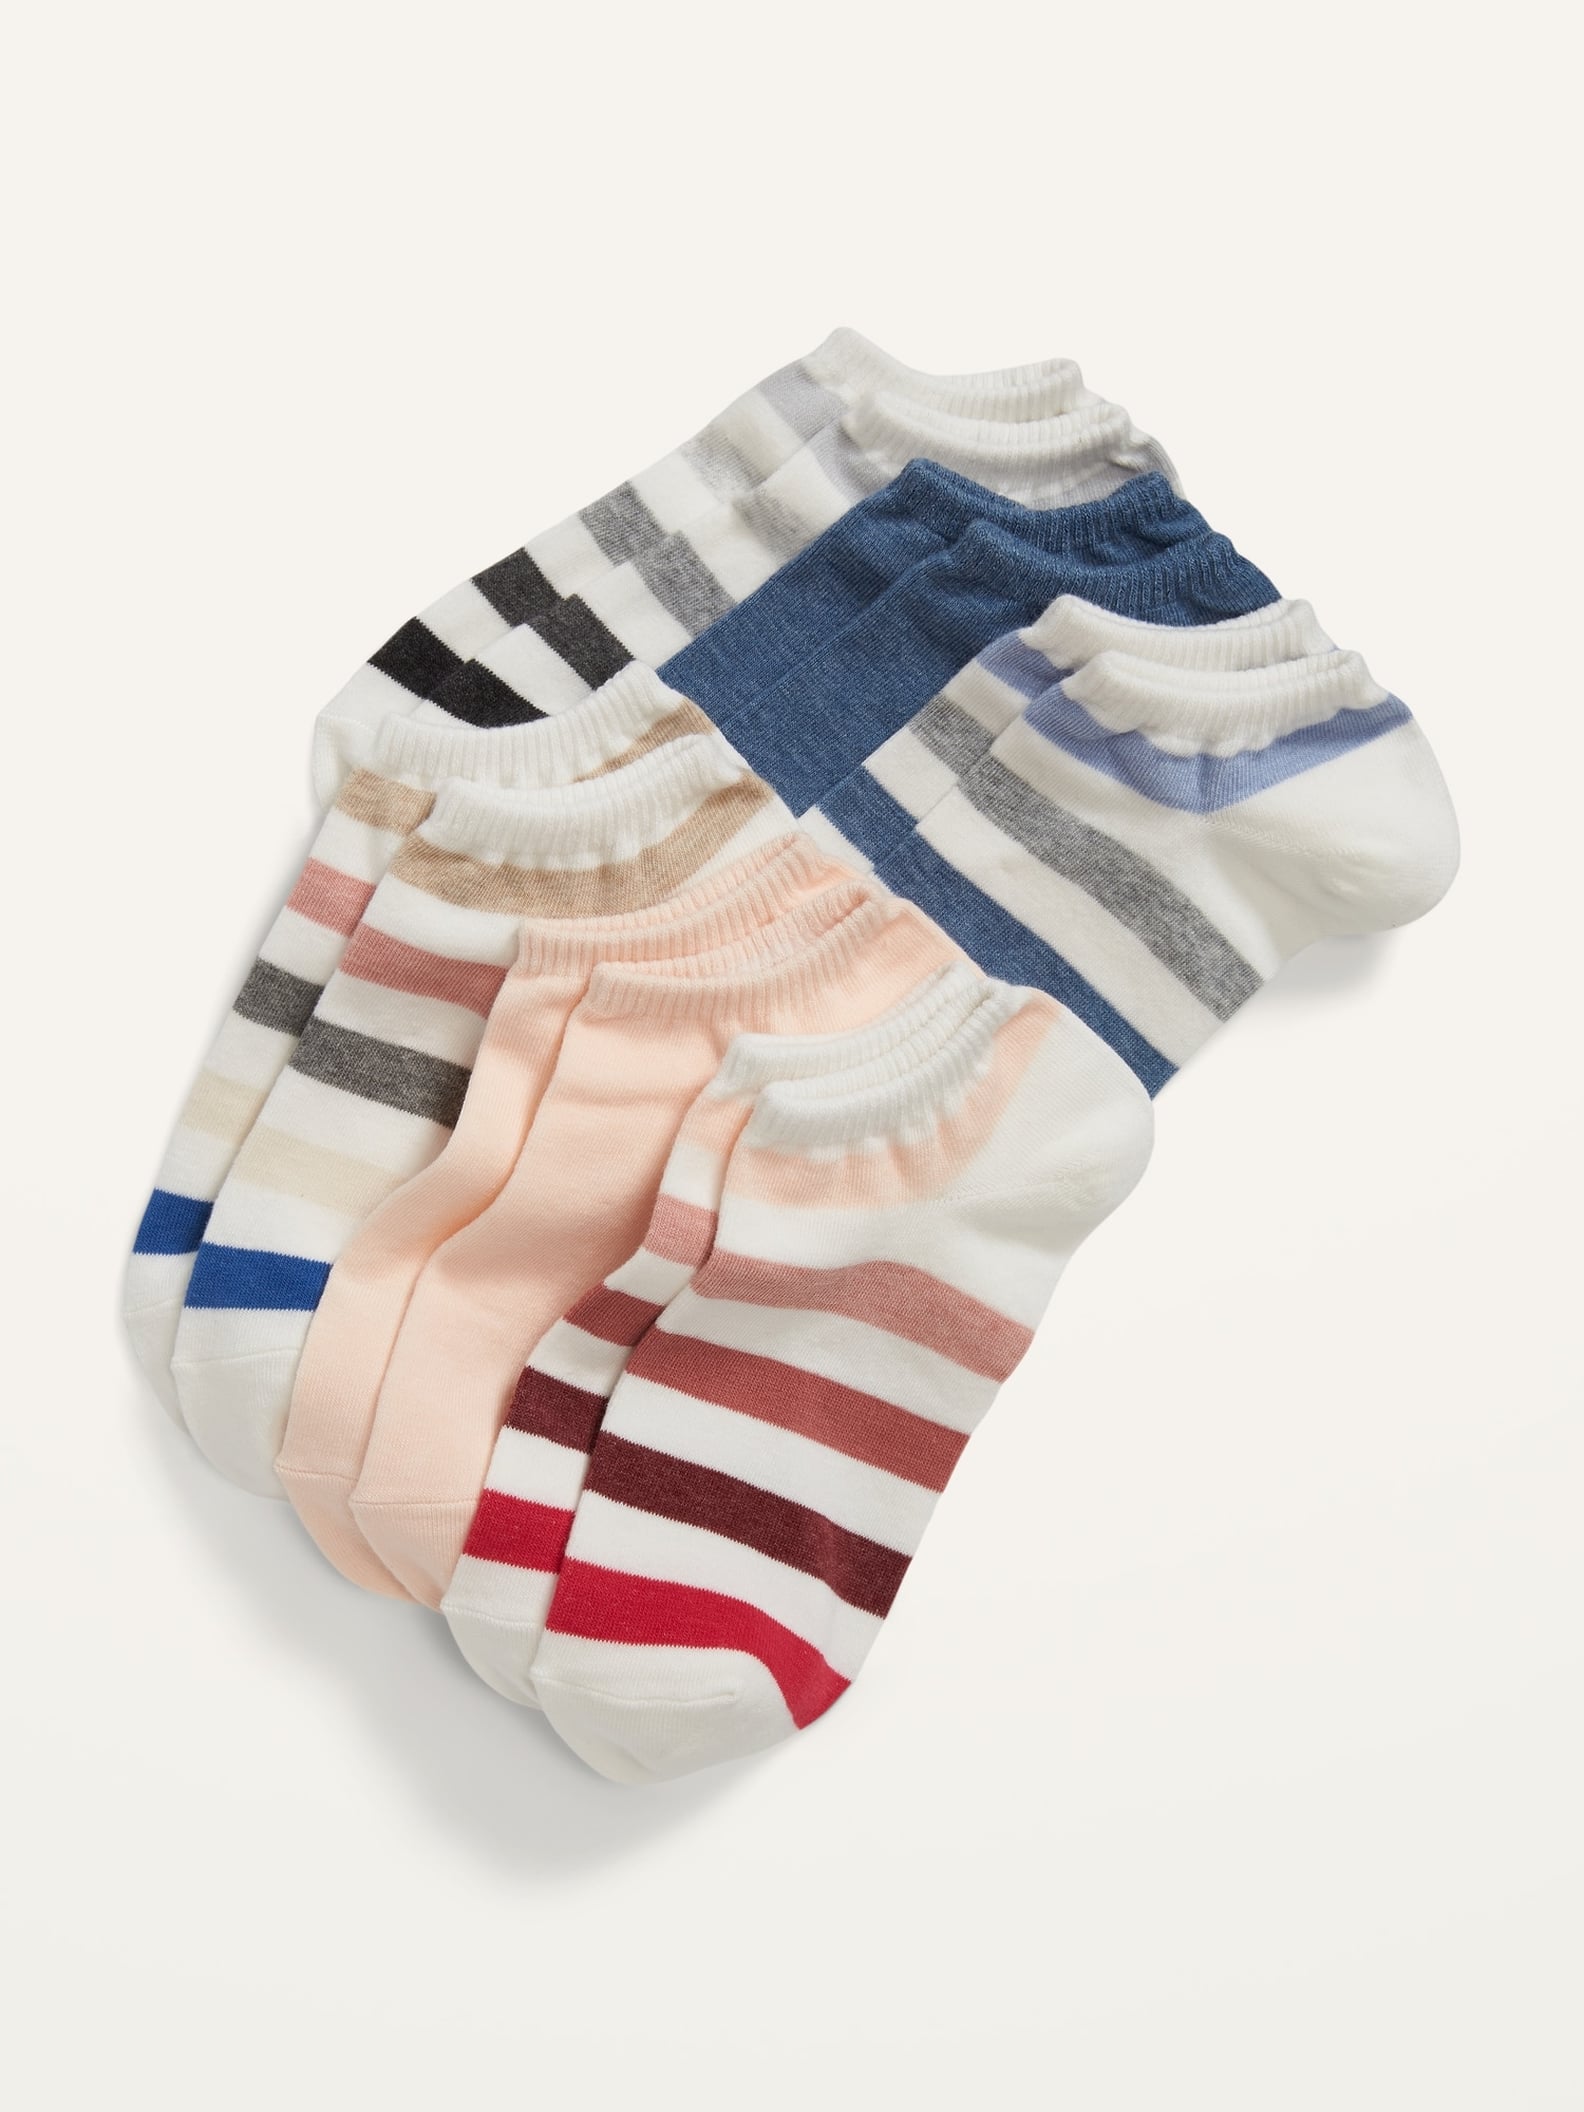 Cheap Stocking Stuffers at Old Navy | POPSUGAR Family